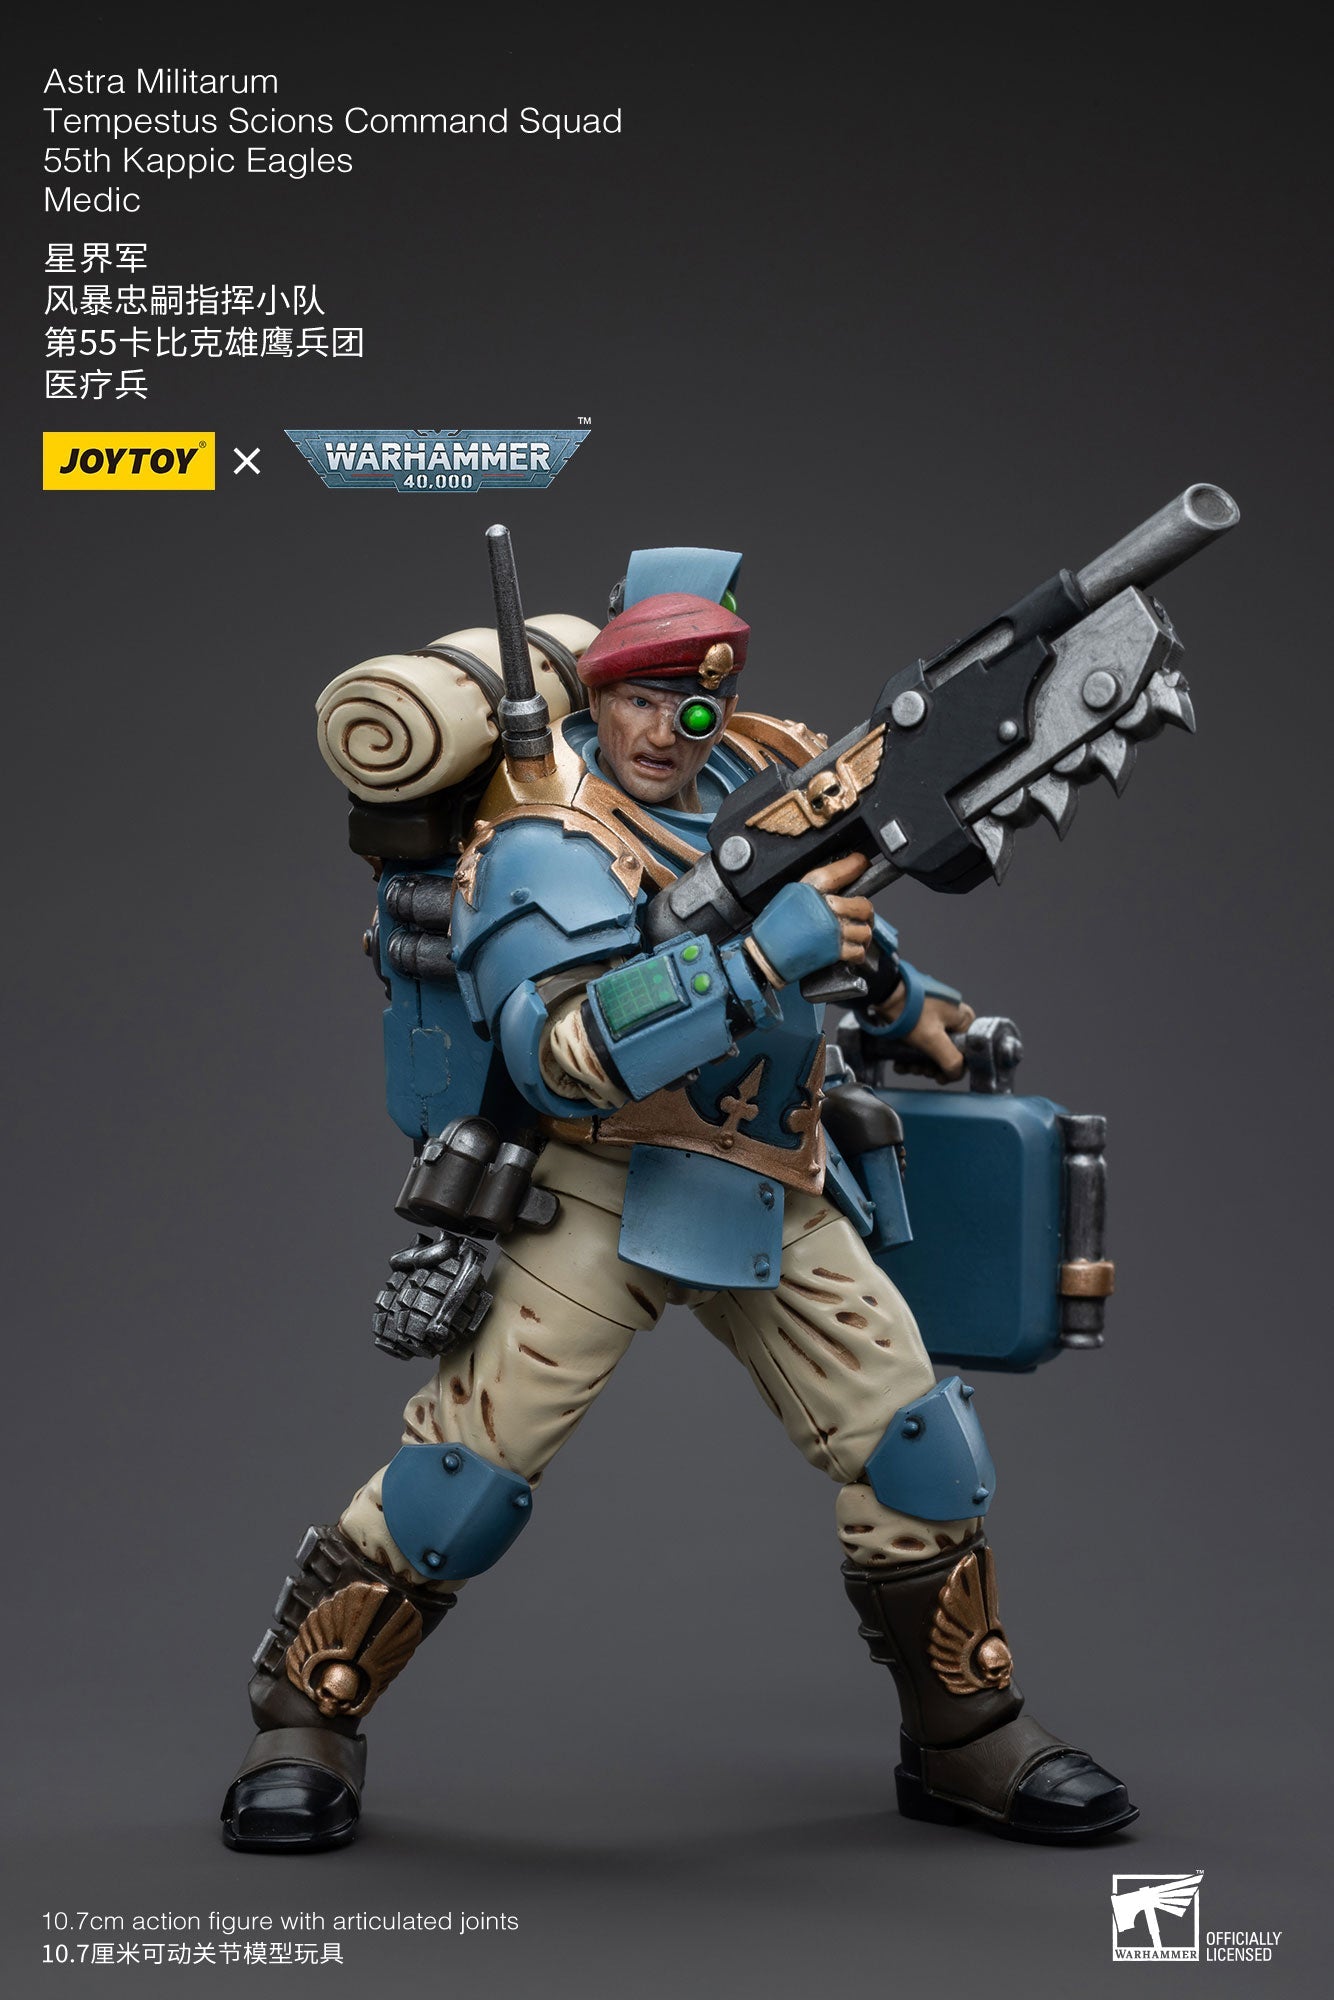 Astra Militarum Tempestus Scions Command Squad 55th Kappic Eagles Medic - Warhammer 40K Action Figure By JOYTOY